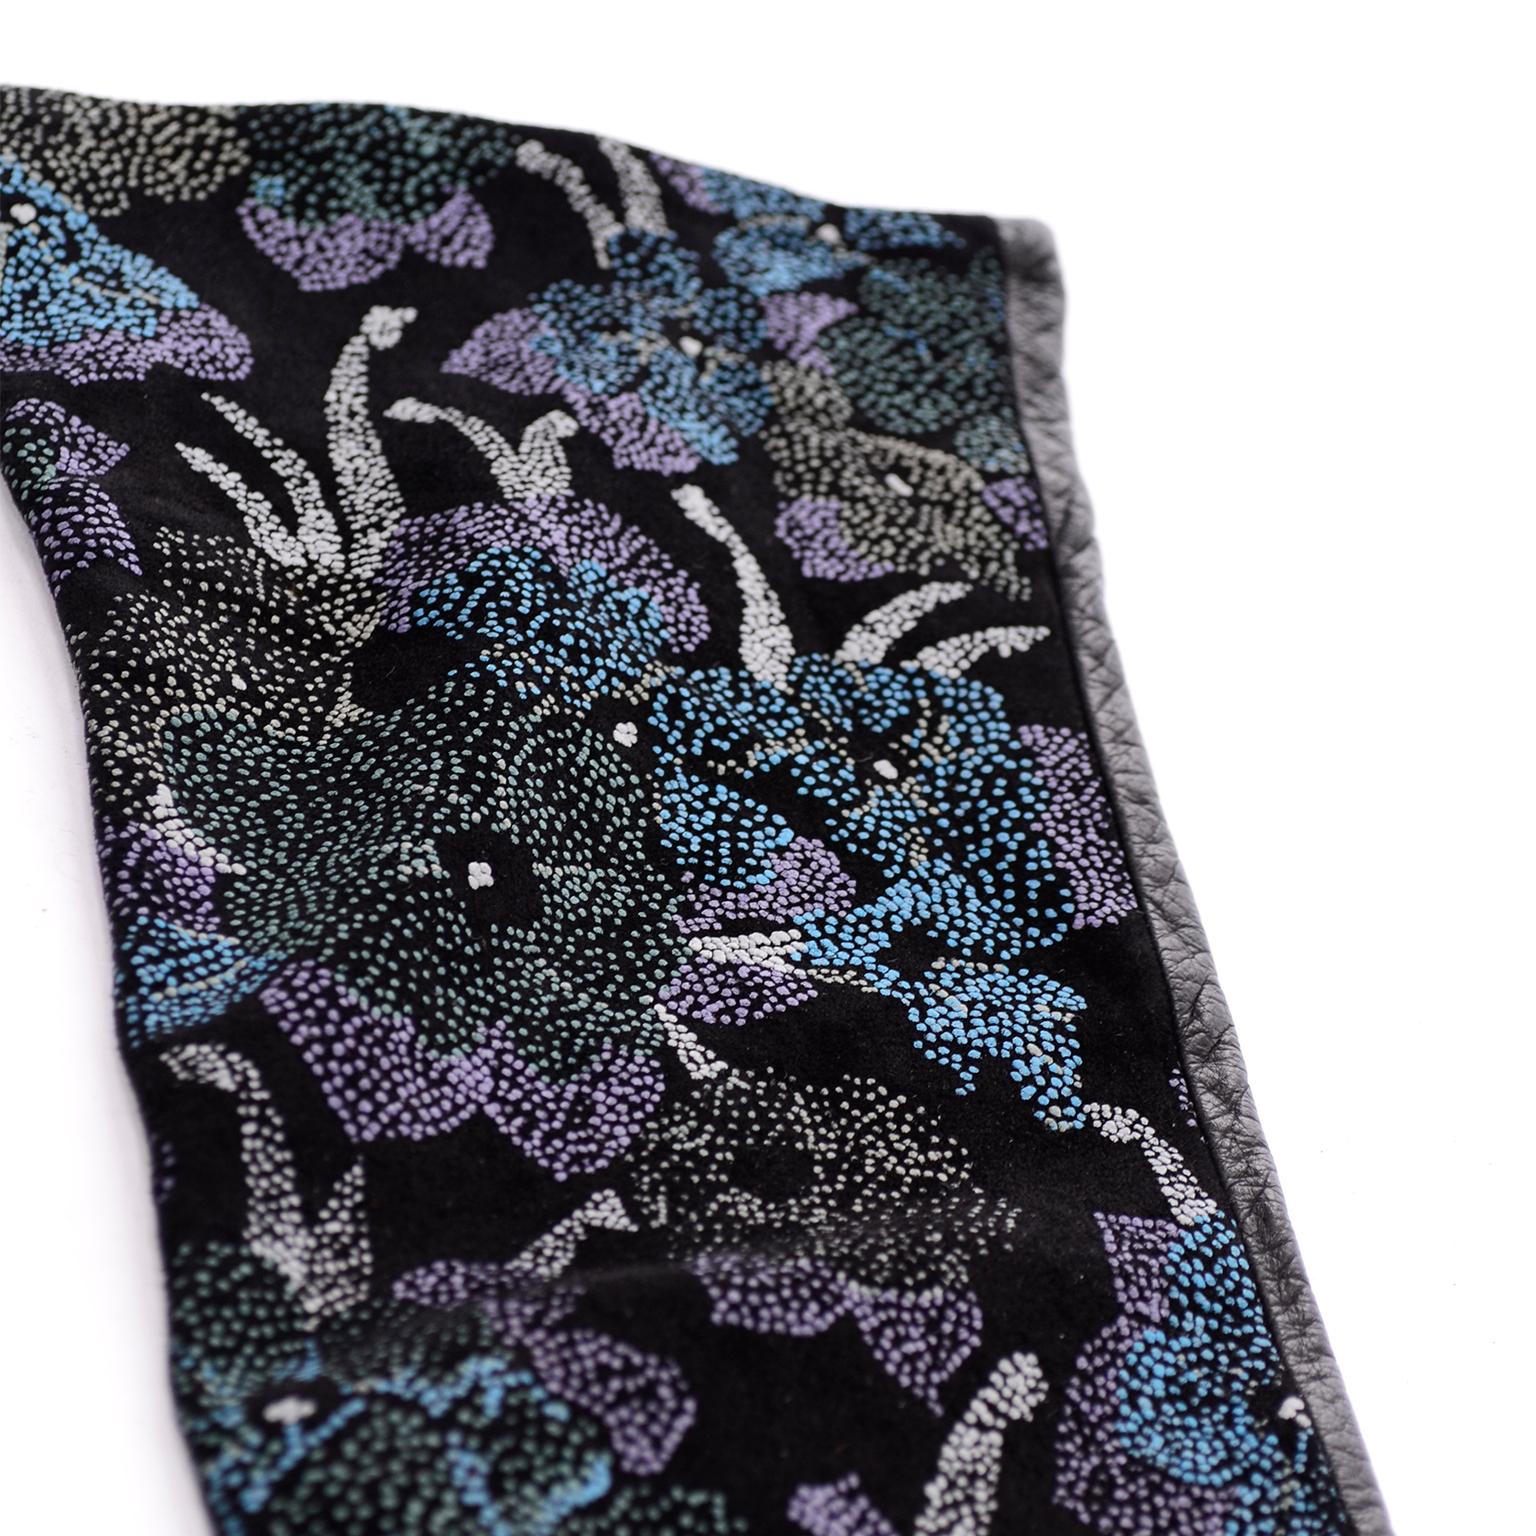 These Carlos Falchi opera length long gloves are blue leather with hand painted pointilism style flowers on the top. The dots that create these flowers are a range of blues, purples and white. These gloves were made in Italy and are fully lined in